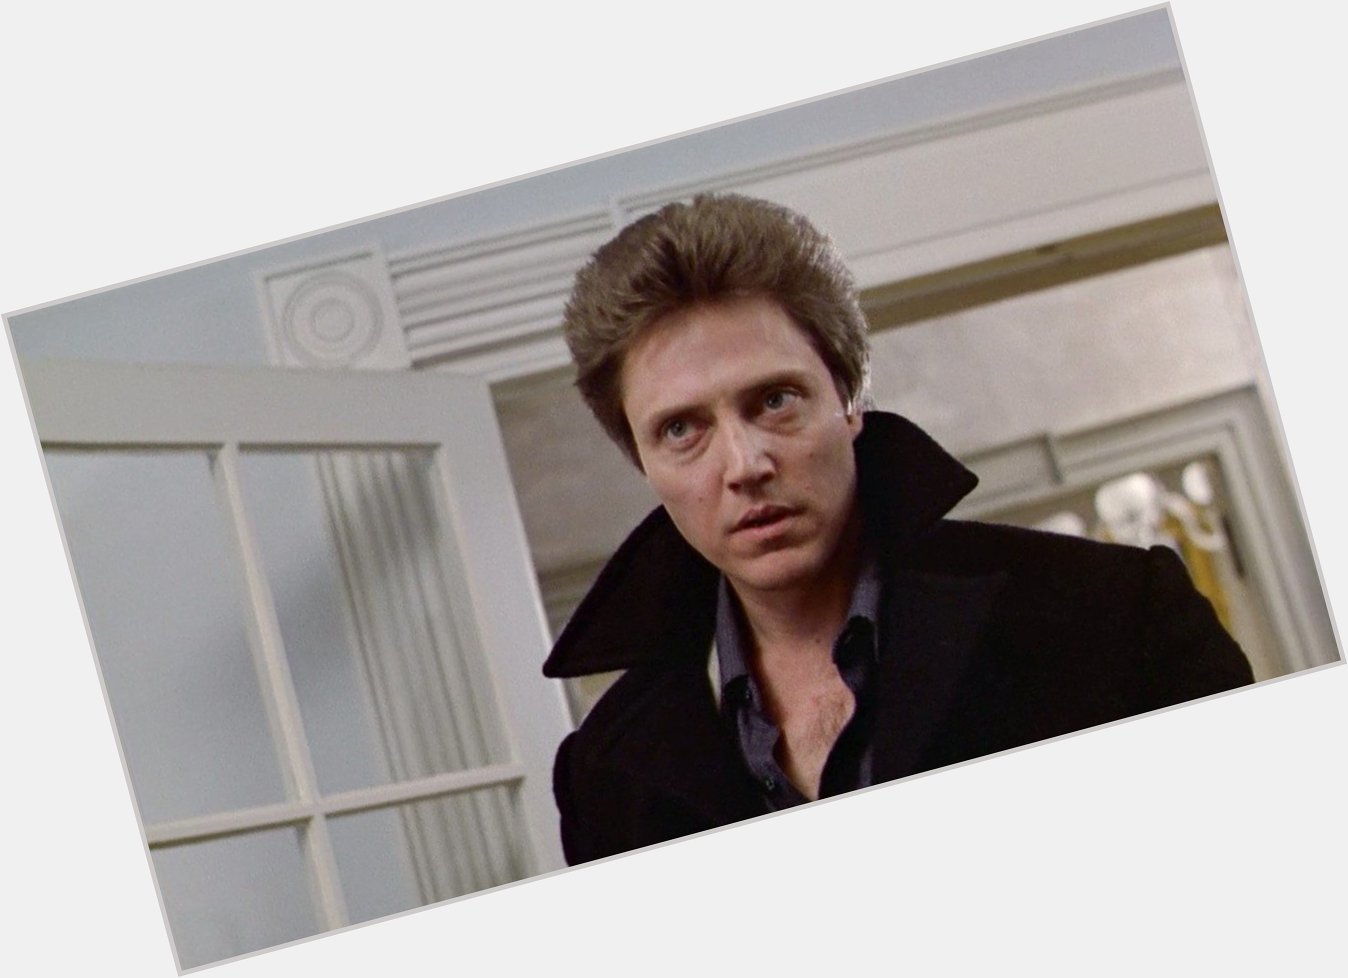 Happy Birthday, Christopher Walken! You\re one of the greatest of all time! 